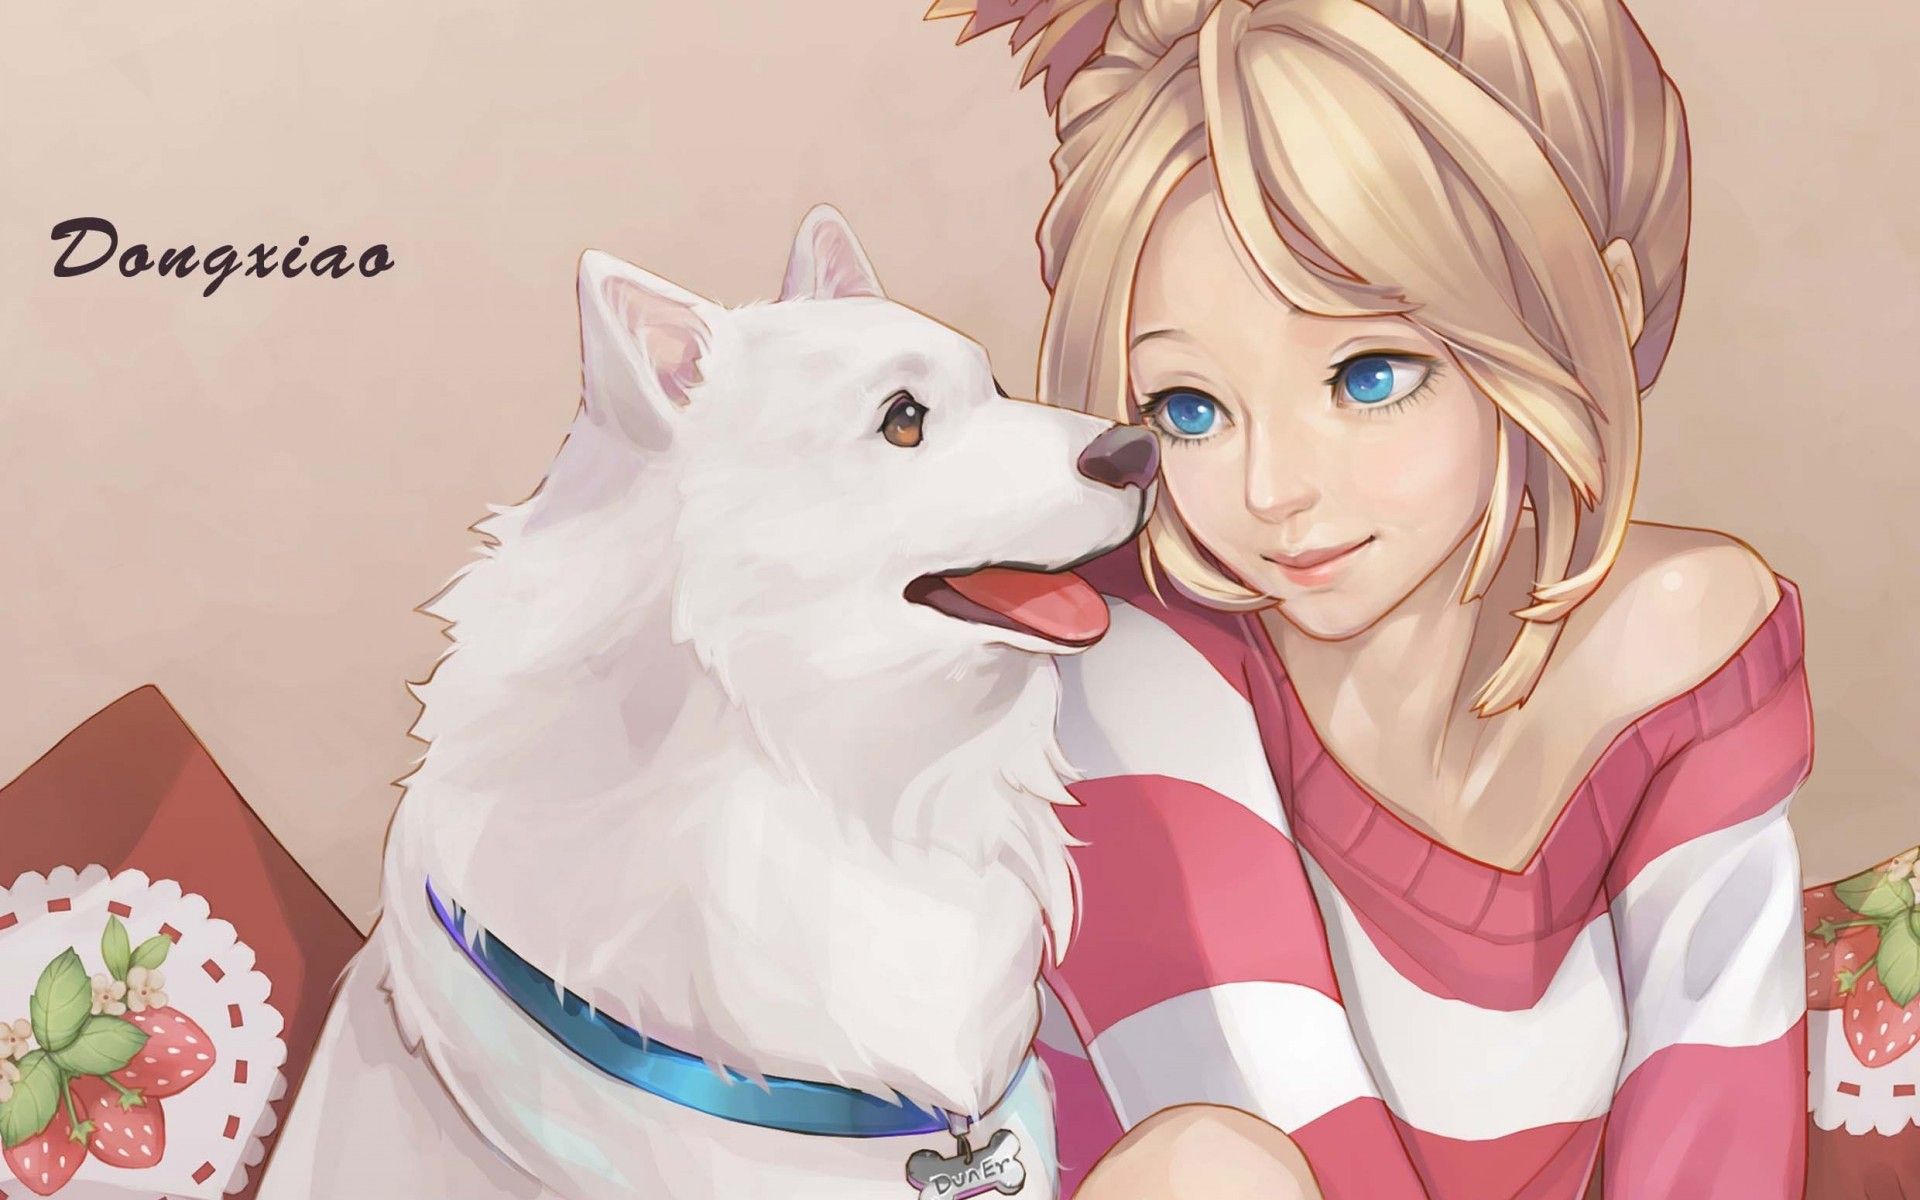 Pet dog with little girl anime painting wallpaper